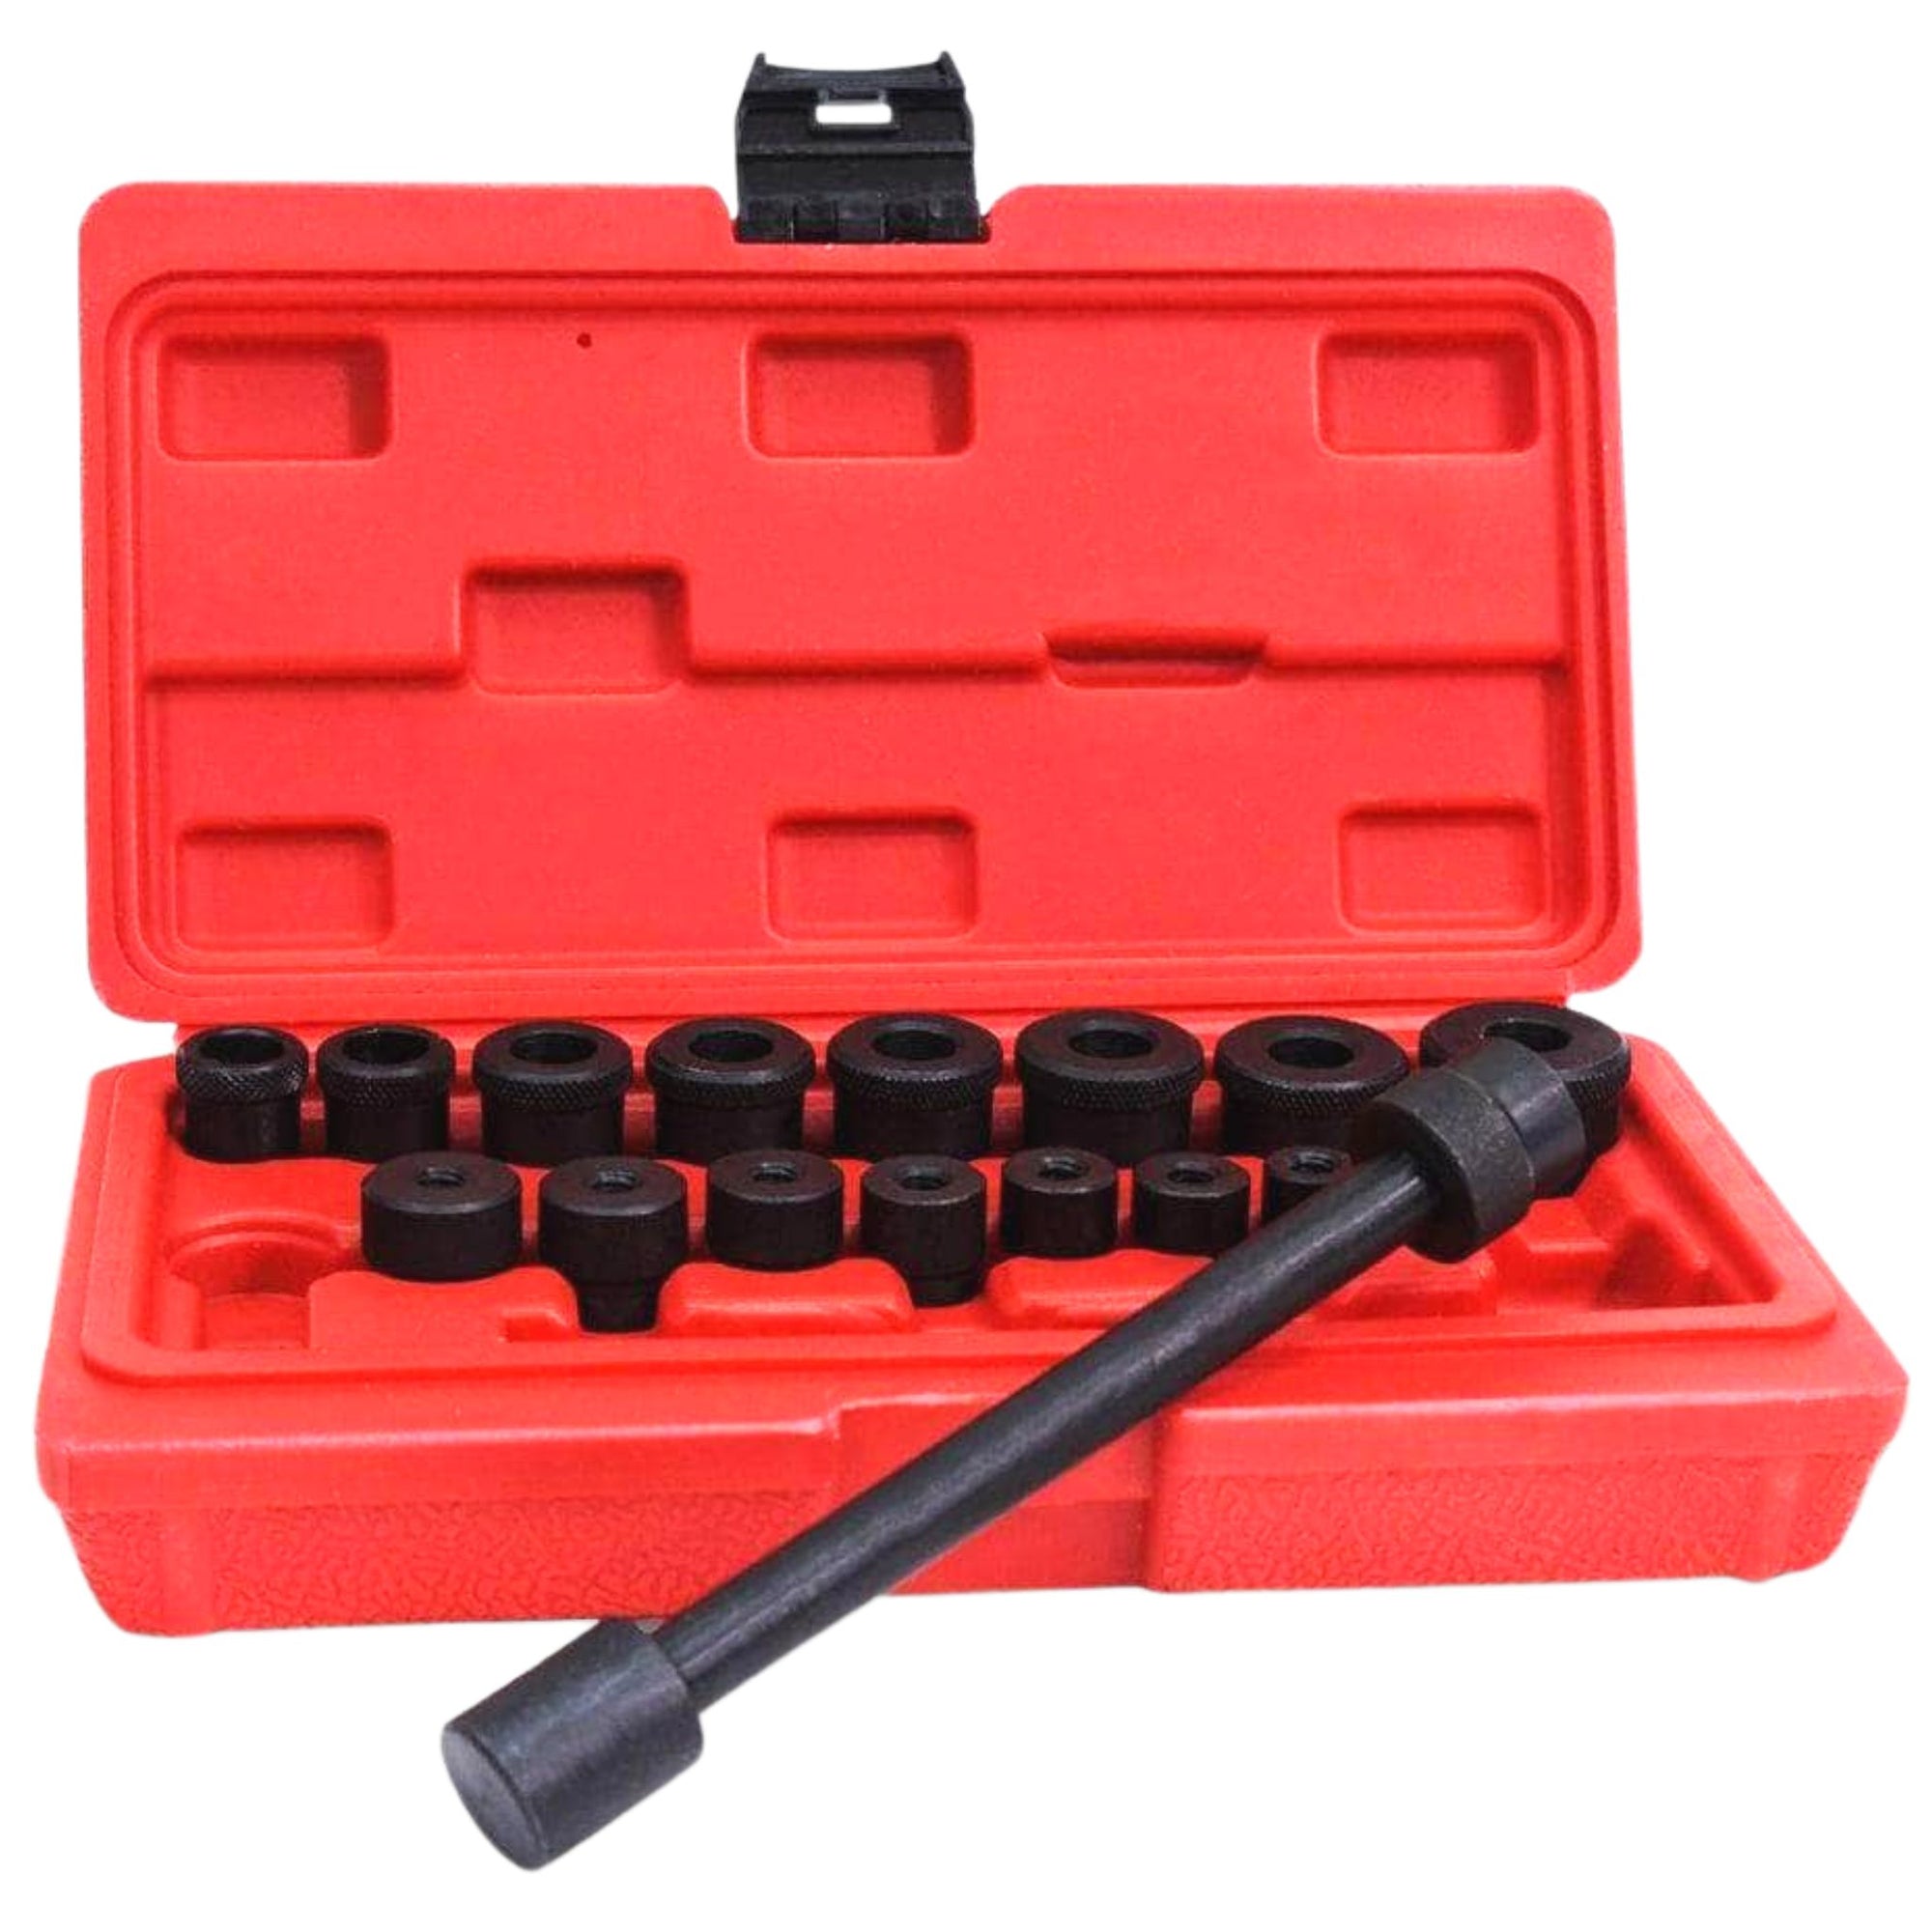 17 Piece Universal Clutch Alignment Tool Set - South East Clearance Centre